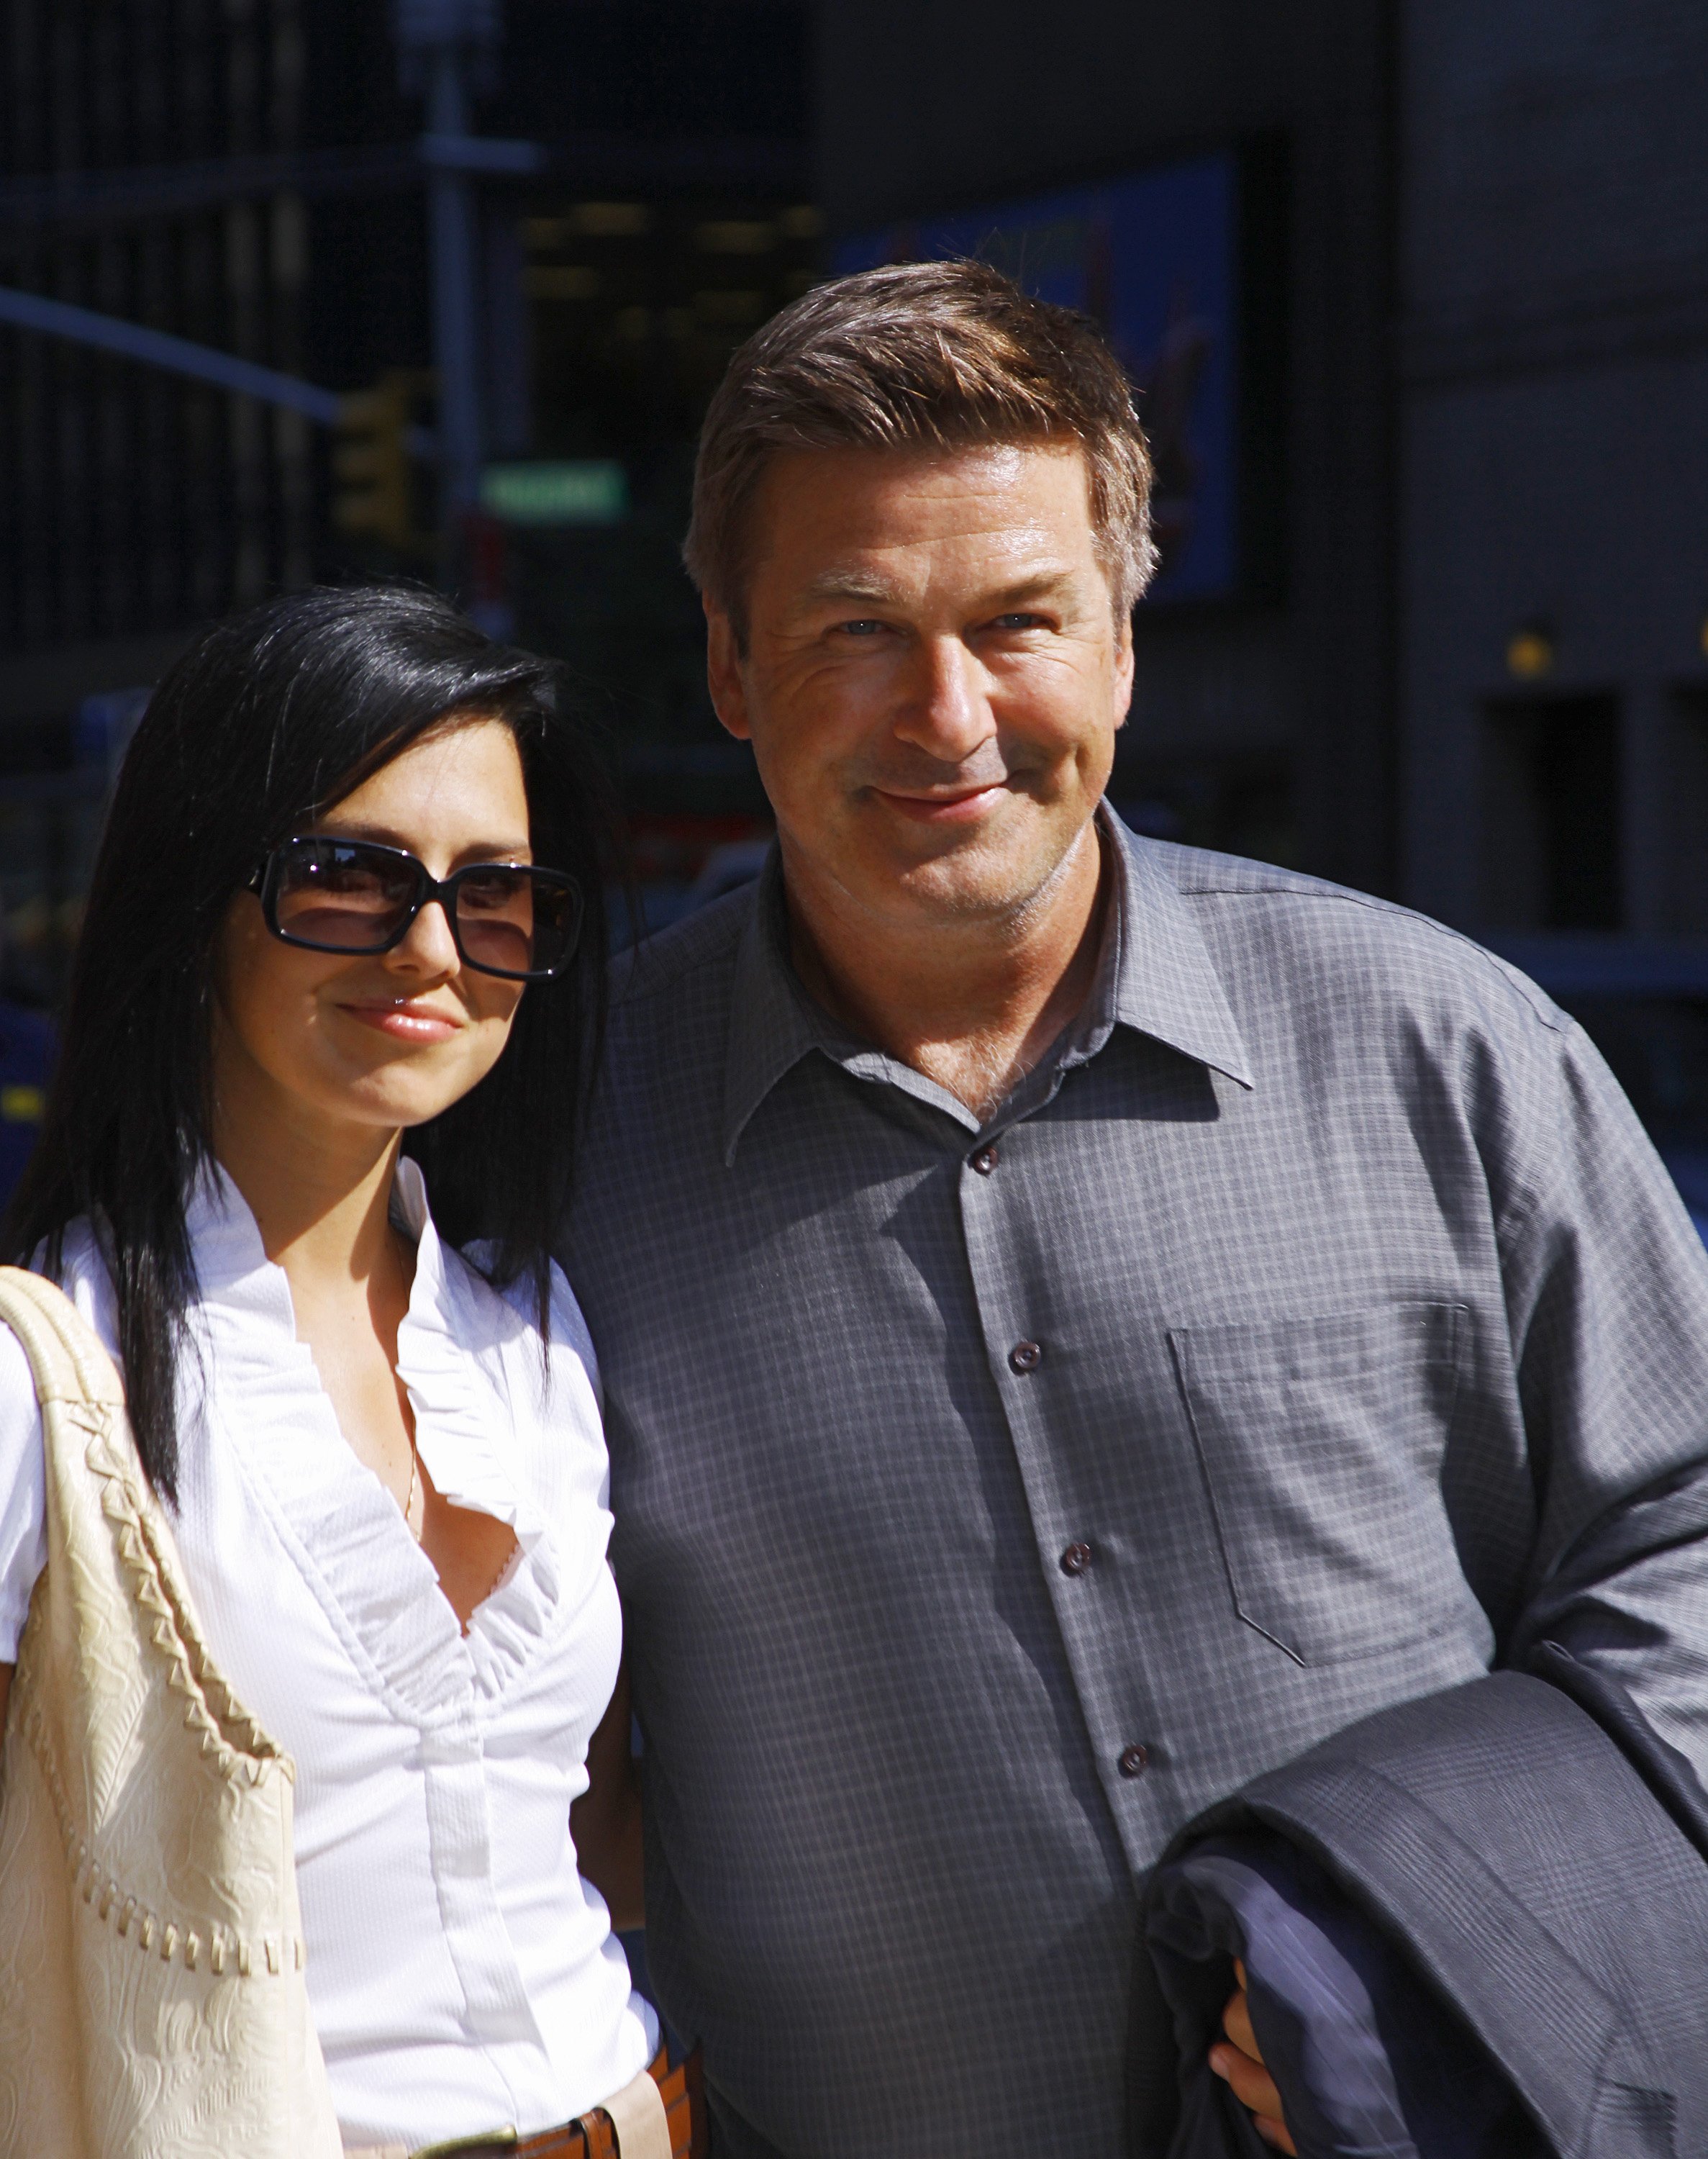 Hilaria Thomas and Alec Baldwin arriving for the "Late Show With David Letterman" at the Ed Sullivan Theater on August 30, 2011 in New York City. | Source: Getty Images 